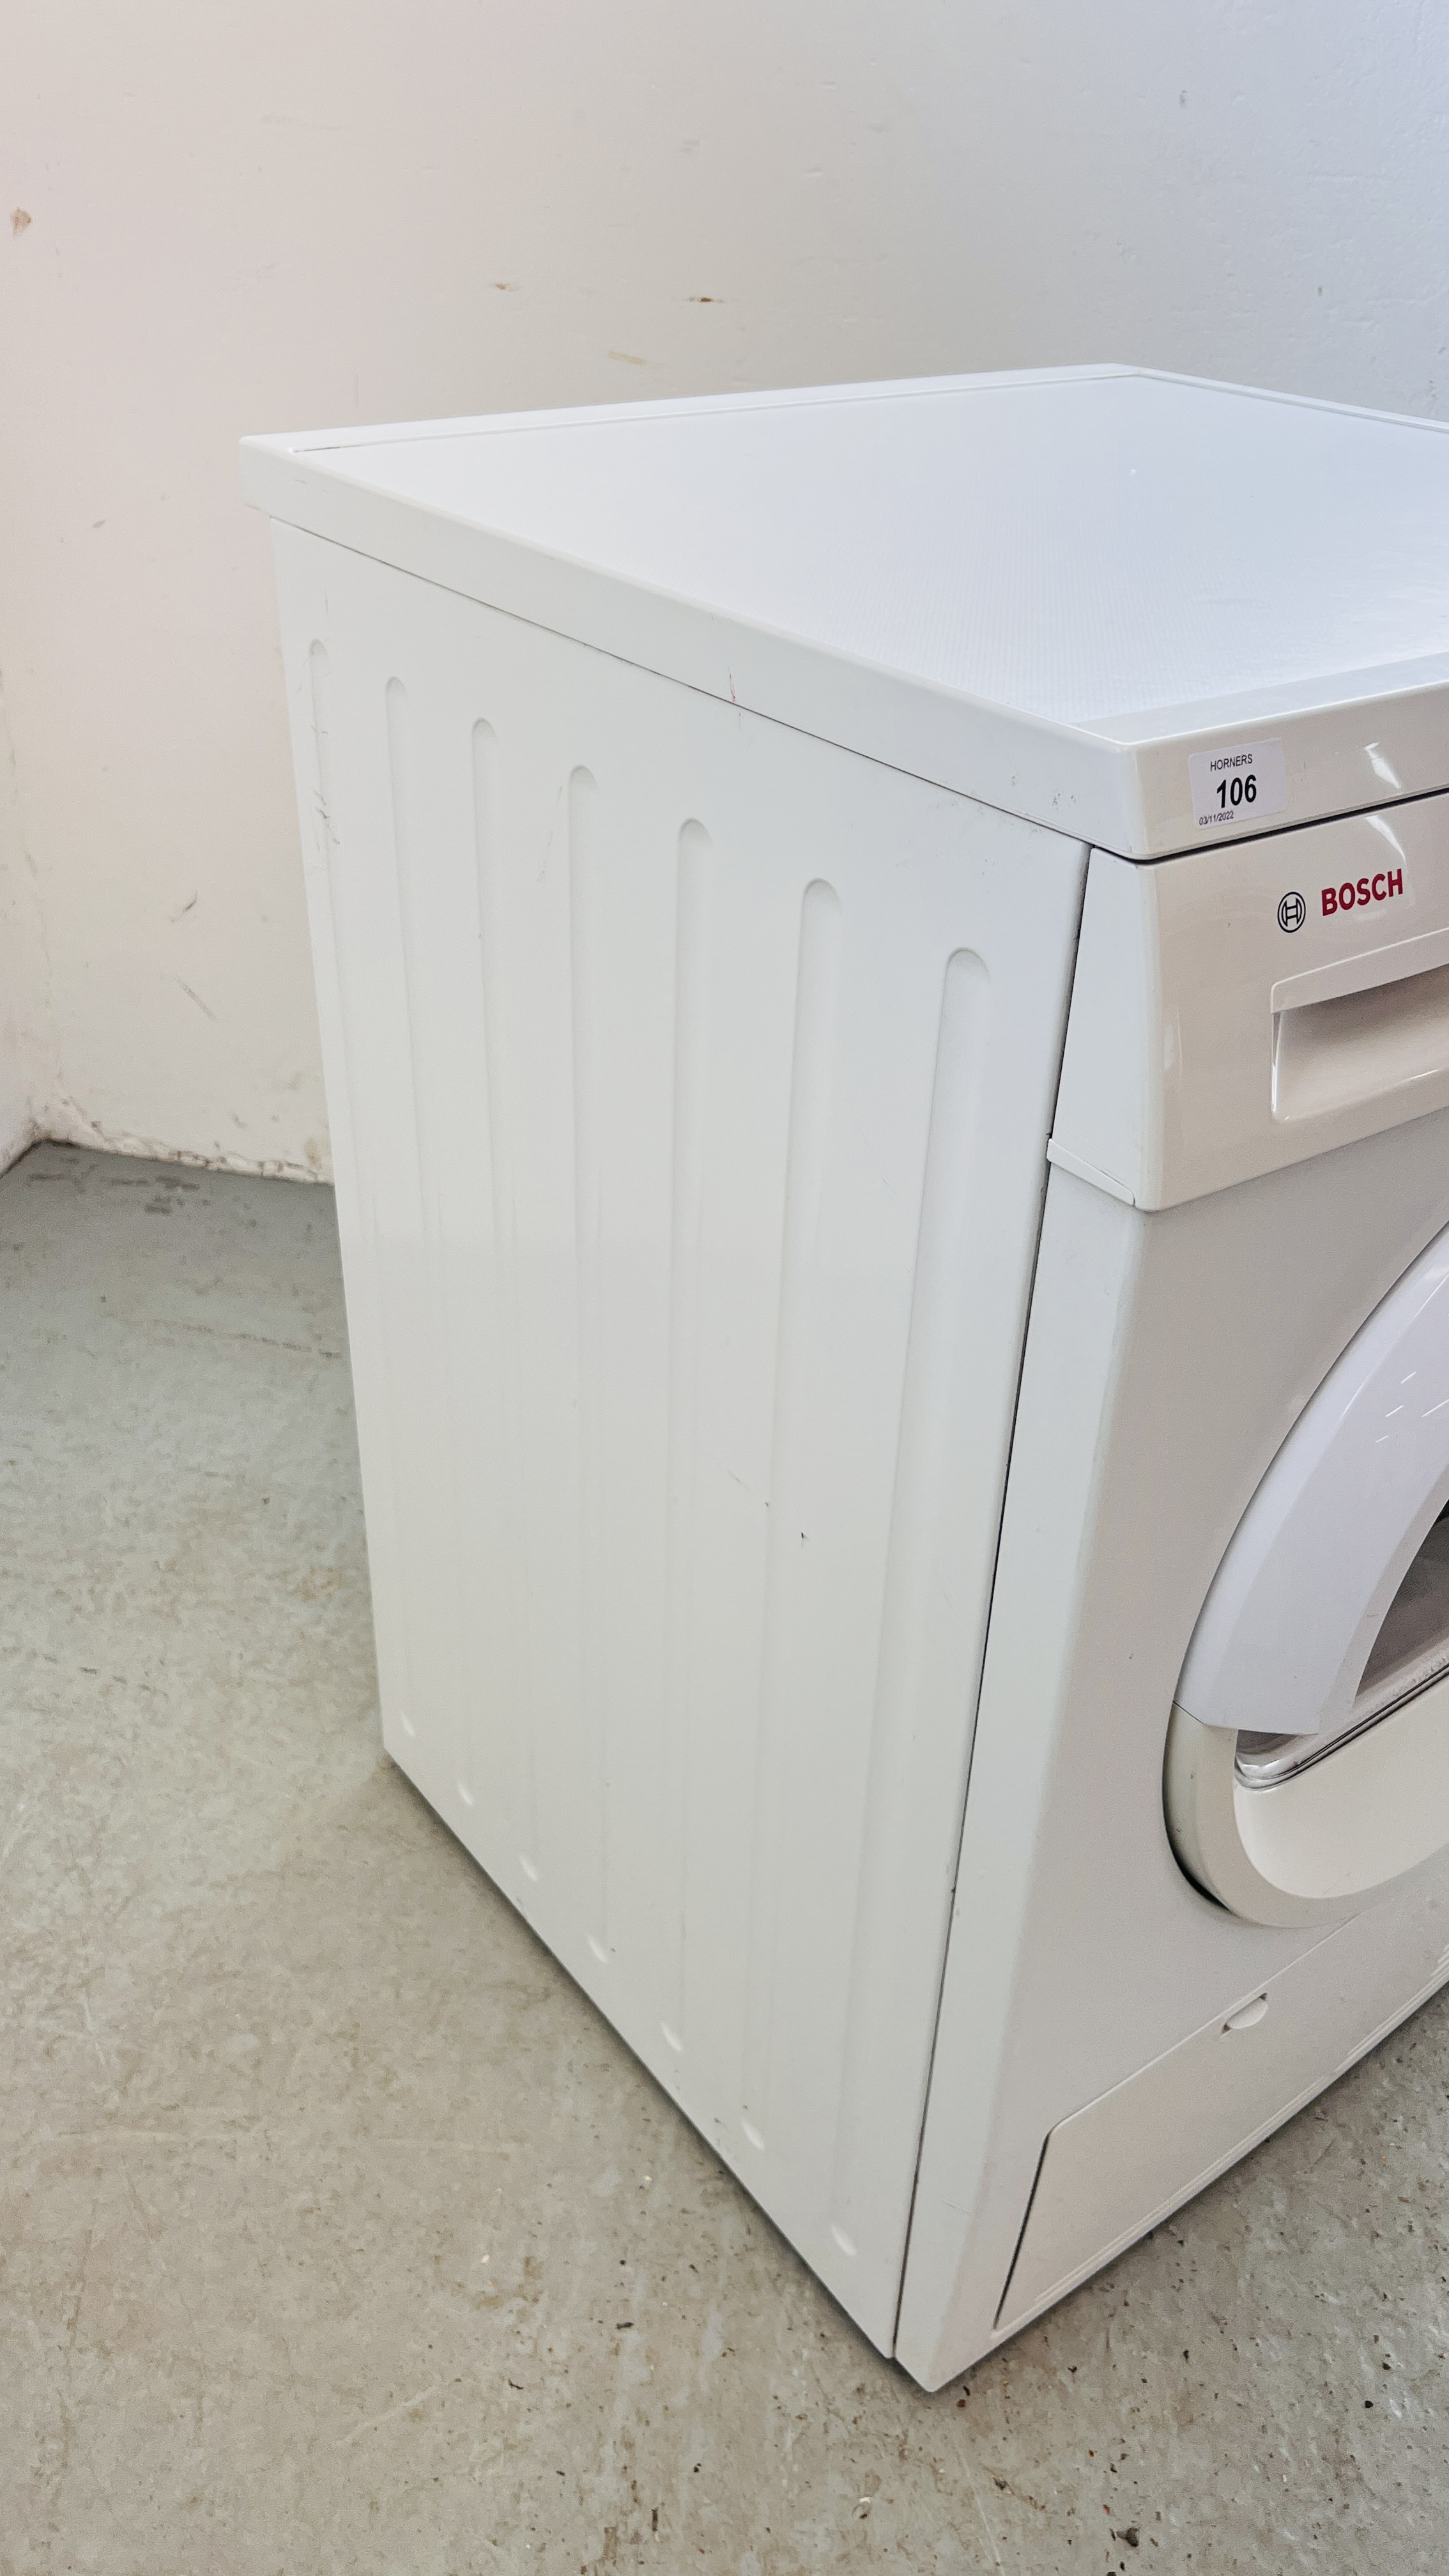 BOSCH EXXCEL CONDENSER TUMBLE DRYER - SOLD AS SEEN - Image 8 of 8